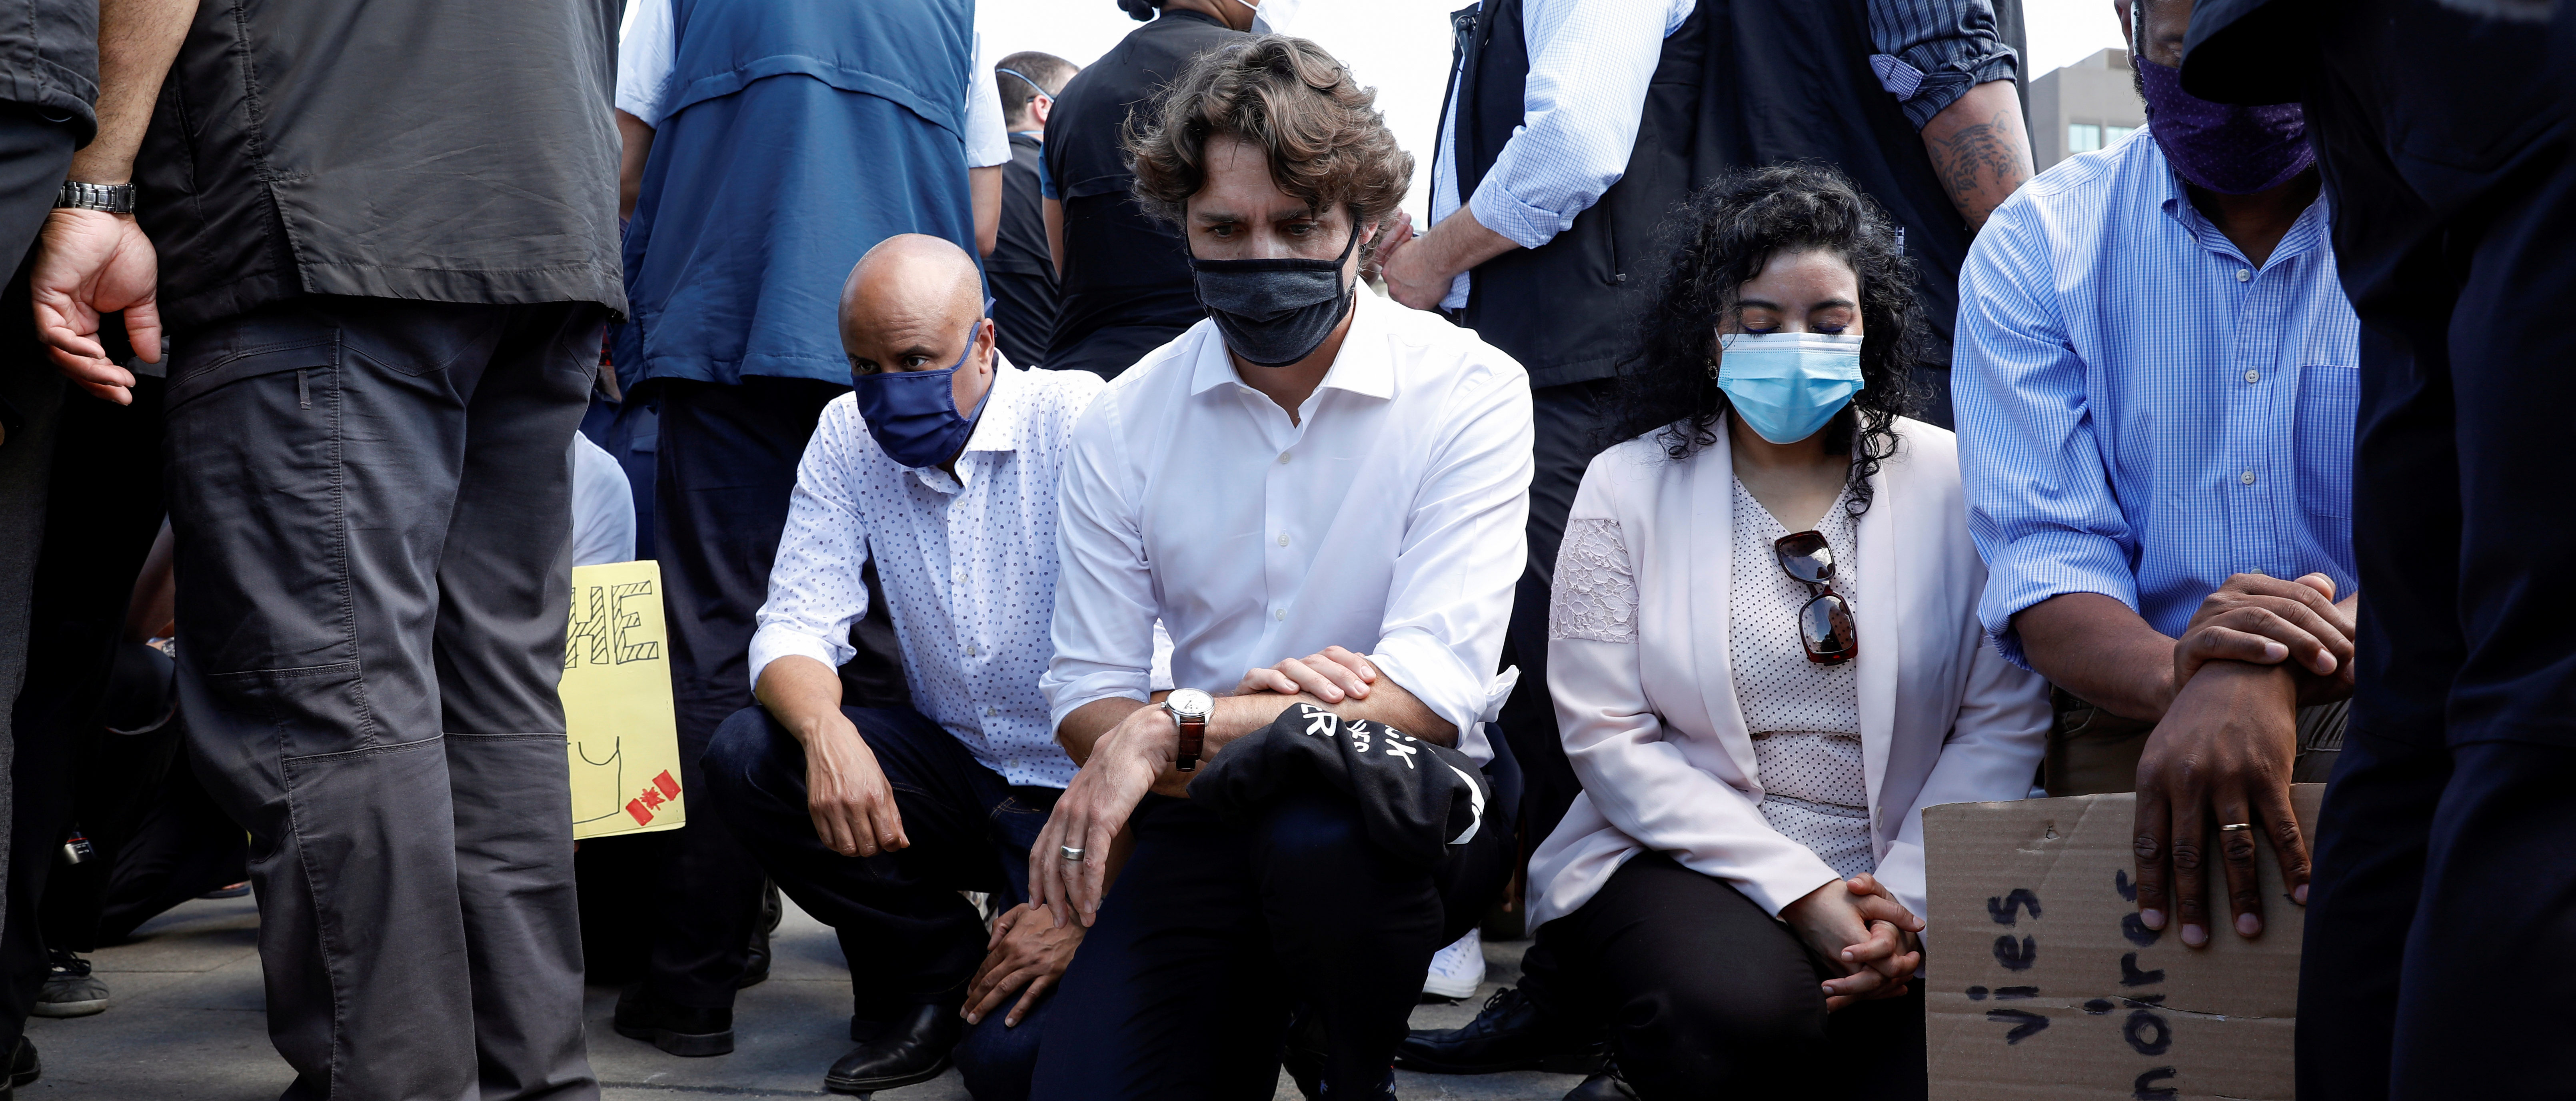 Canada's Prime Minister Justin Trudeau wears a mask as he takes part in a rally against the death in Minneapolis police custody of George Floyd, on Parliament Hill, in Ottawa, Ontario, Canada June 5, 2020. REUTERS/Blair Gable